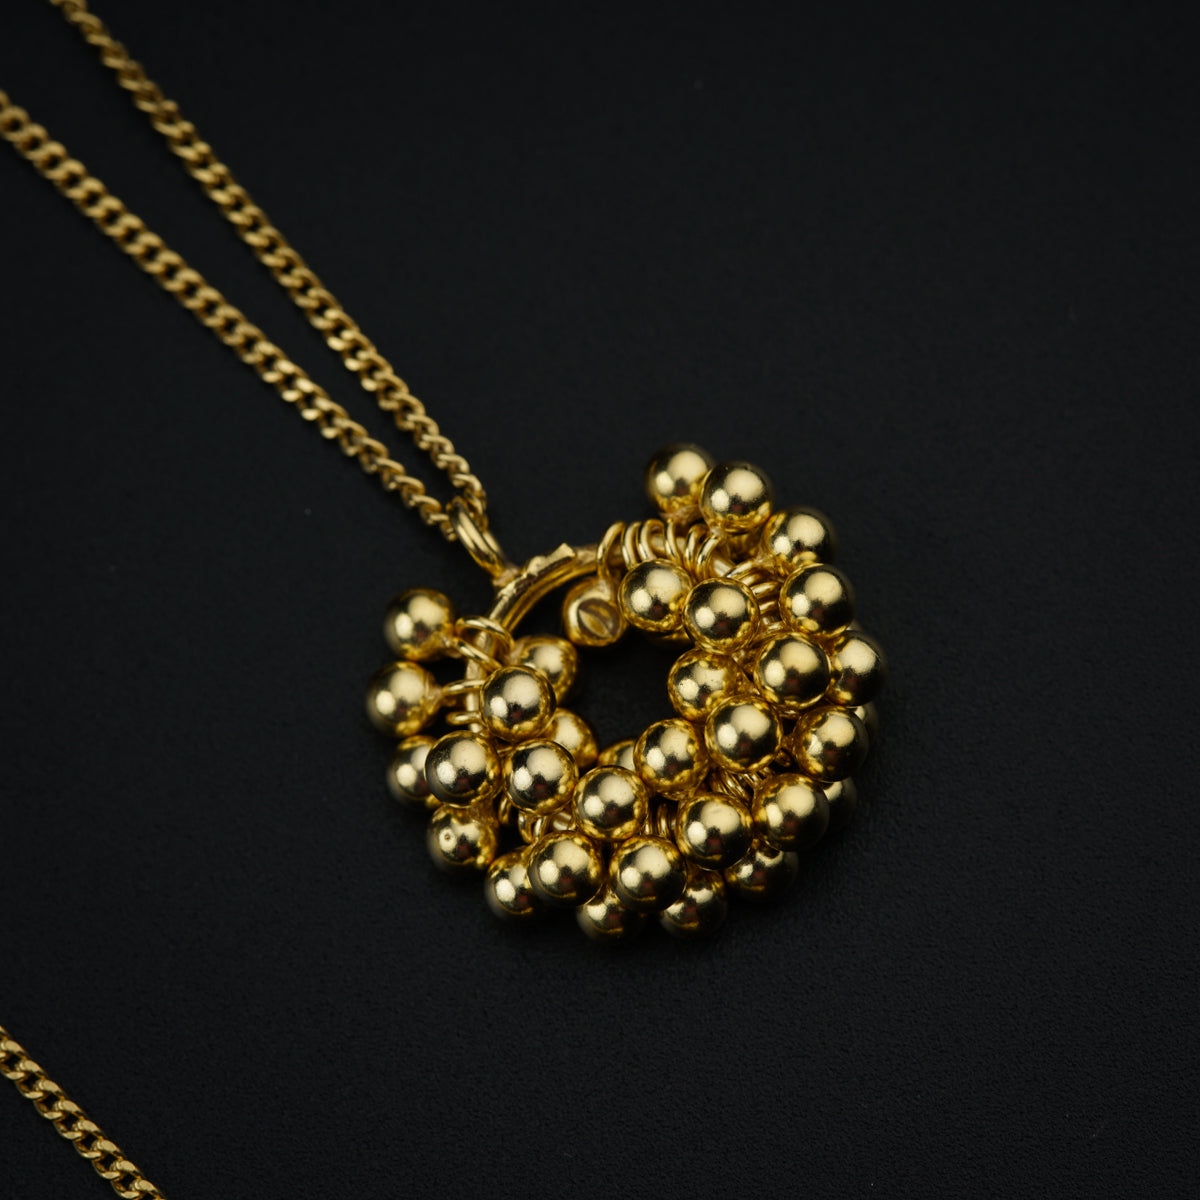 a gold necklace with beads on a black background